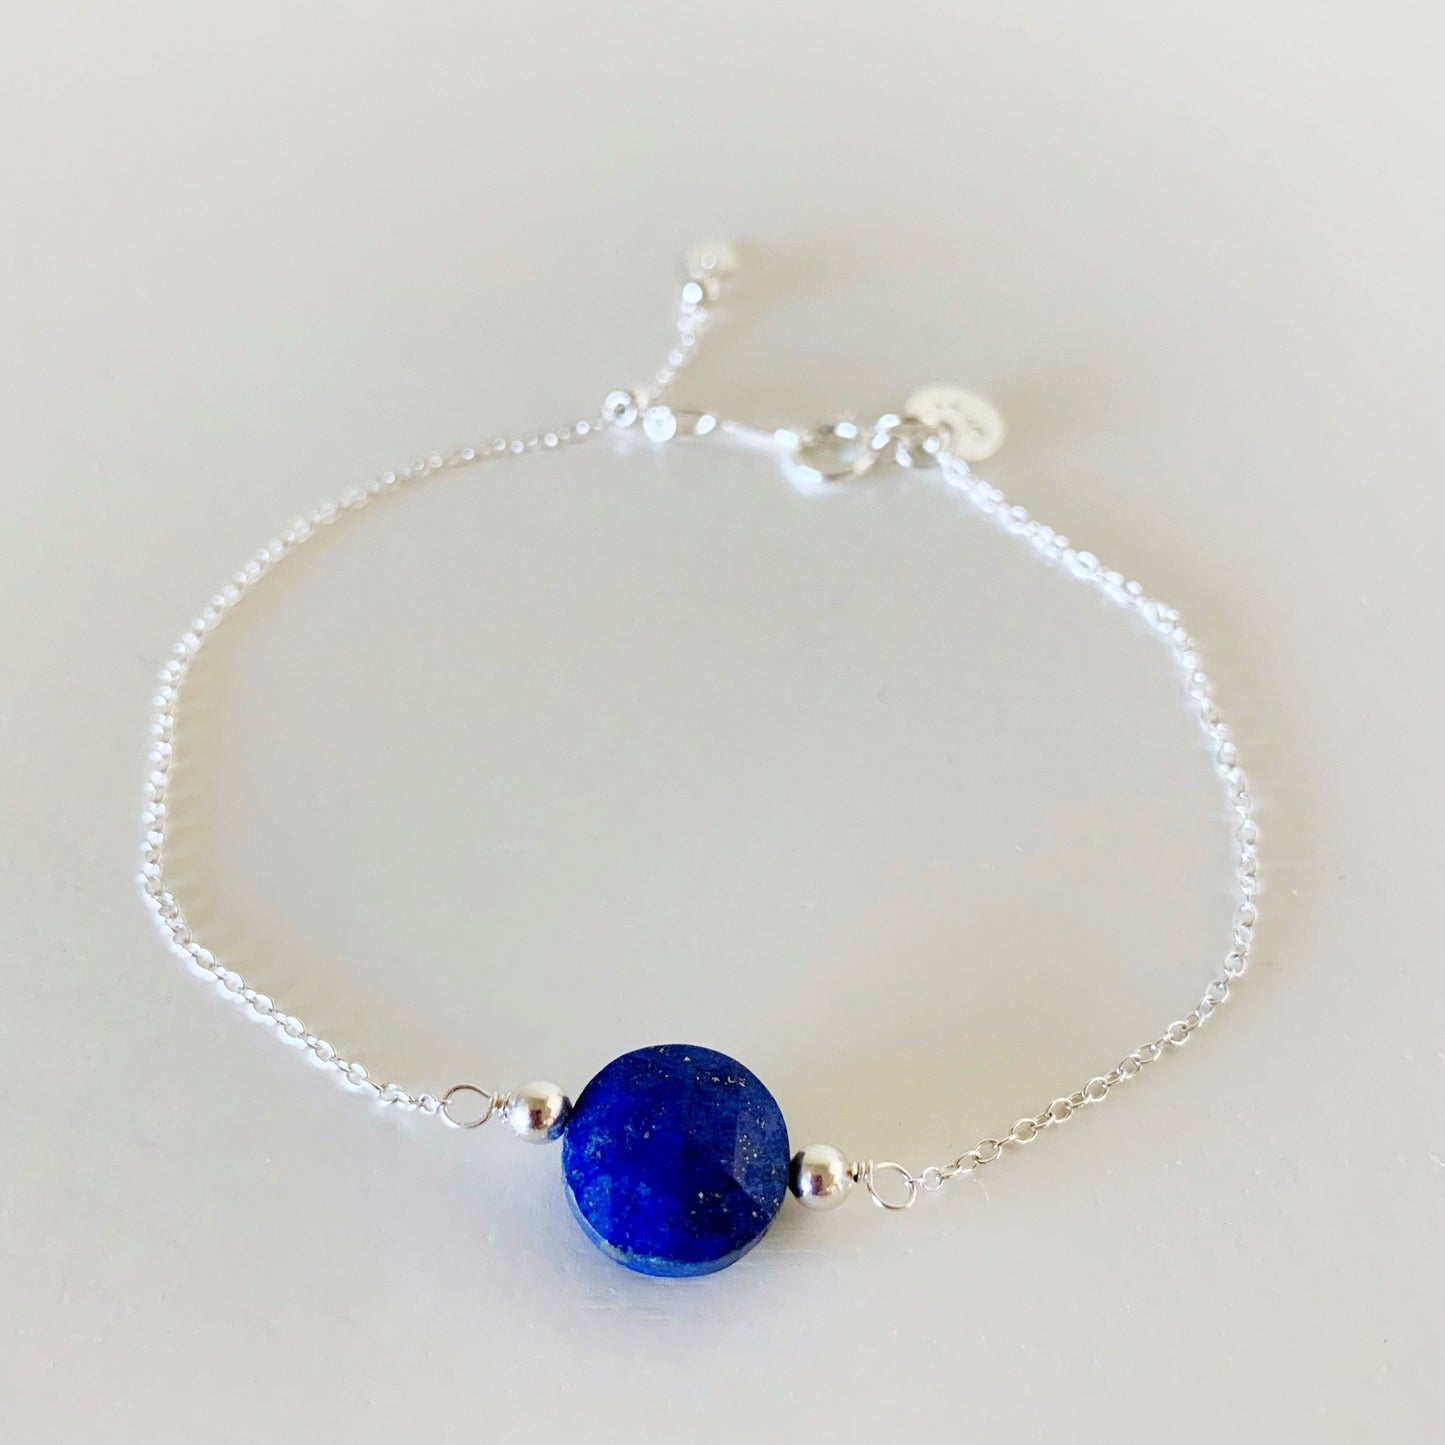 the neptune bracelet by mermaids and madeleines is a sterling silver chain based bracelet with an adjustable slider bead at the clasp. theres a royal blue faceted coin lapis bead at the center of the bracelet. this one is photographed from the front and flat on a white surface